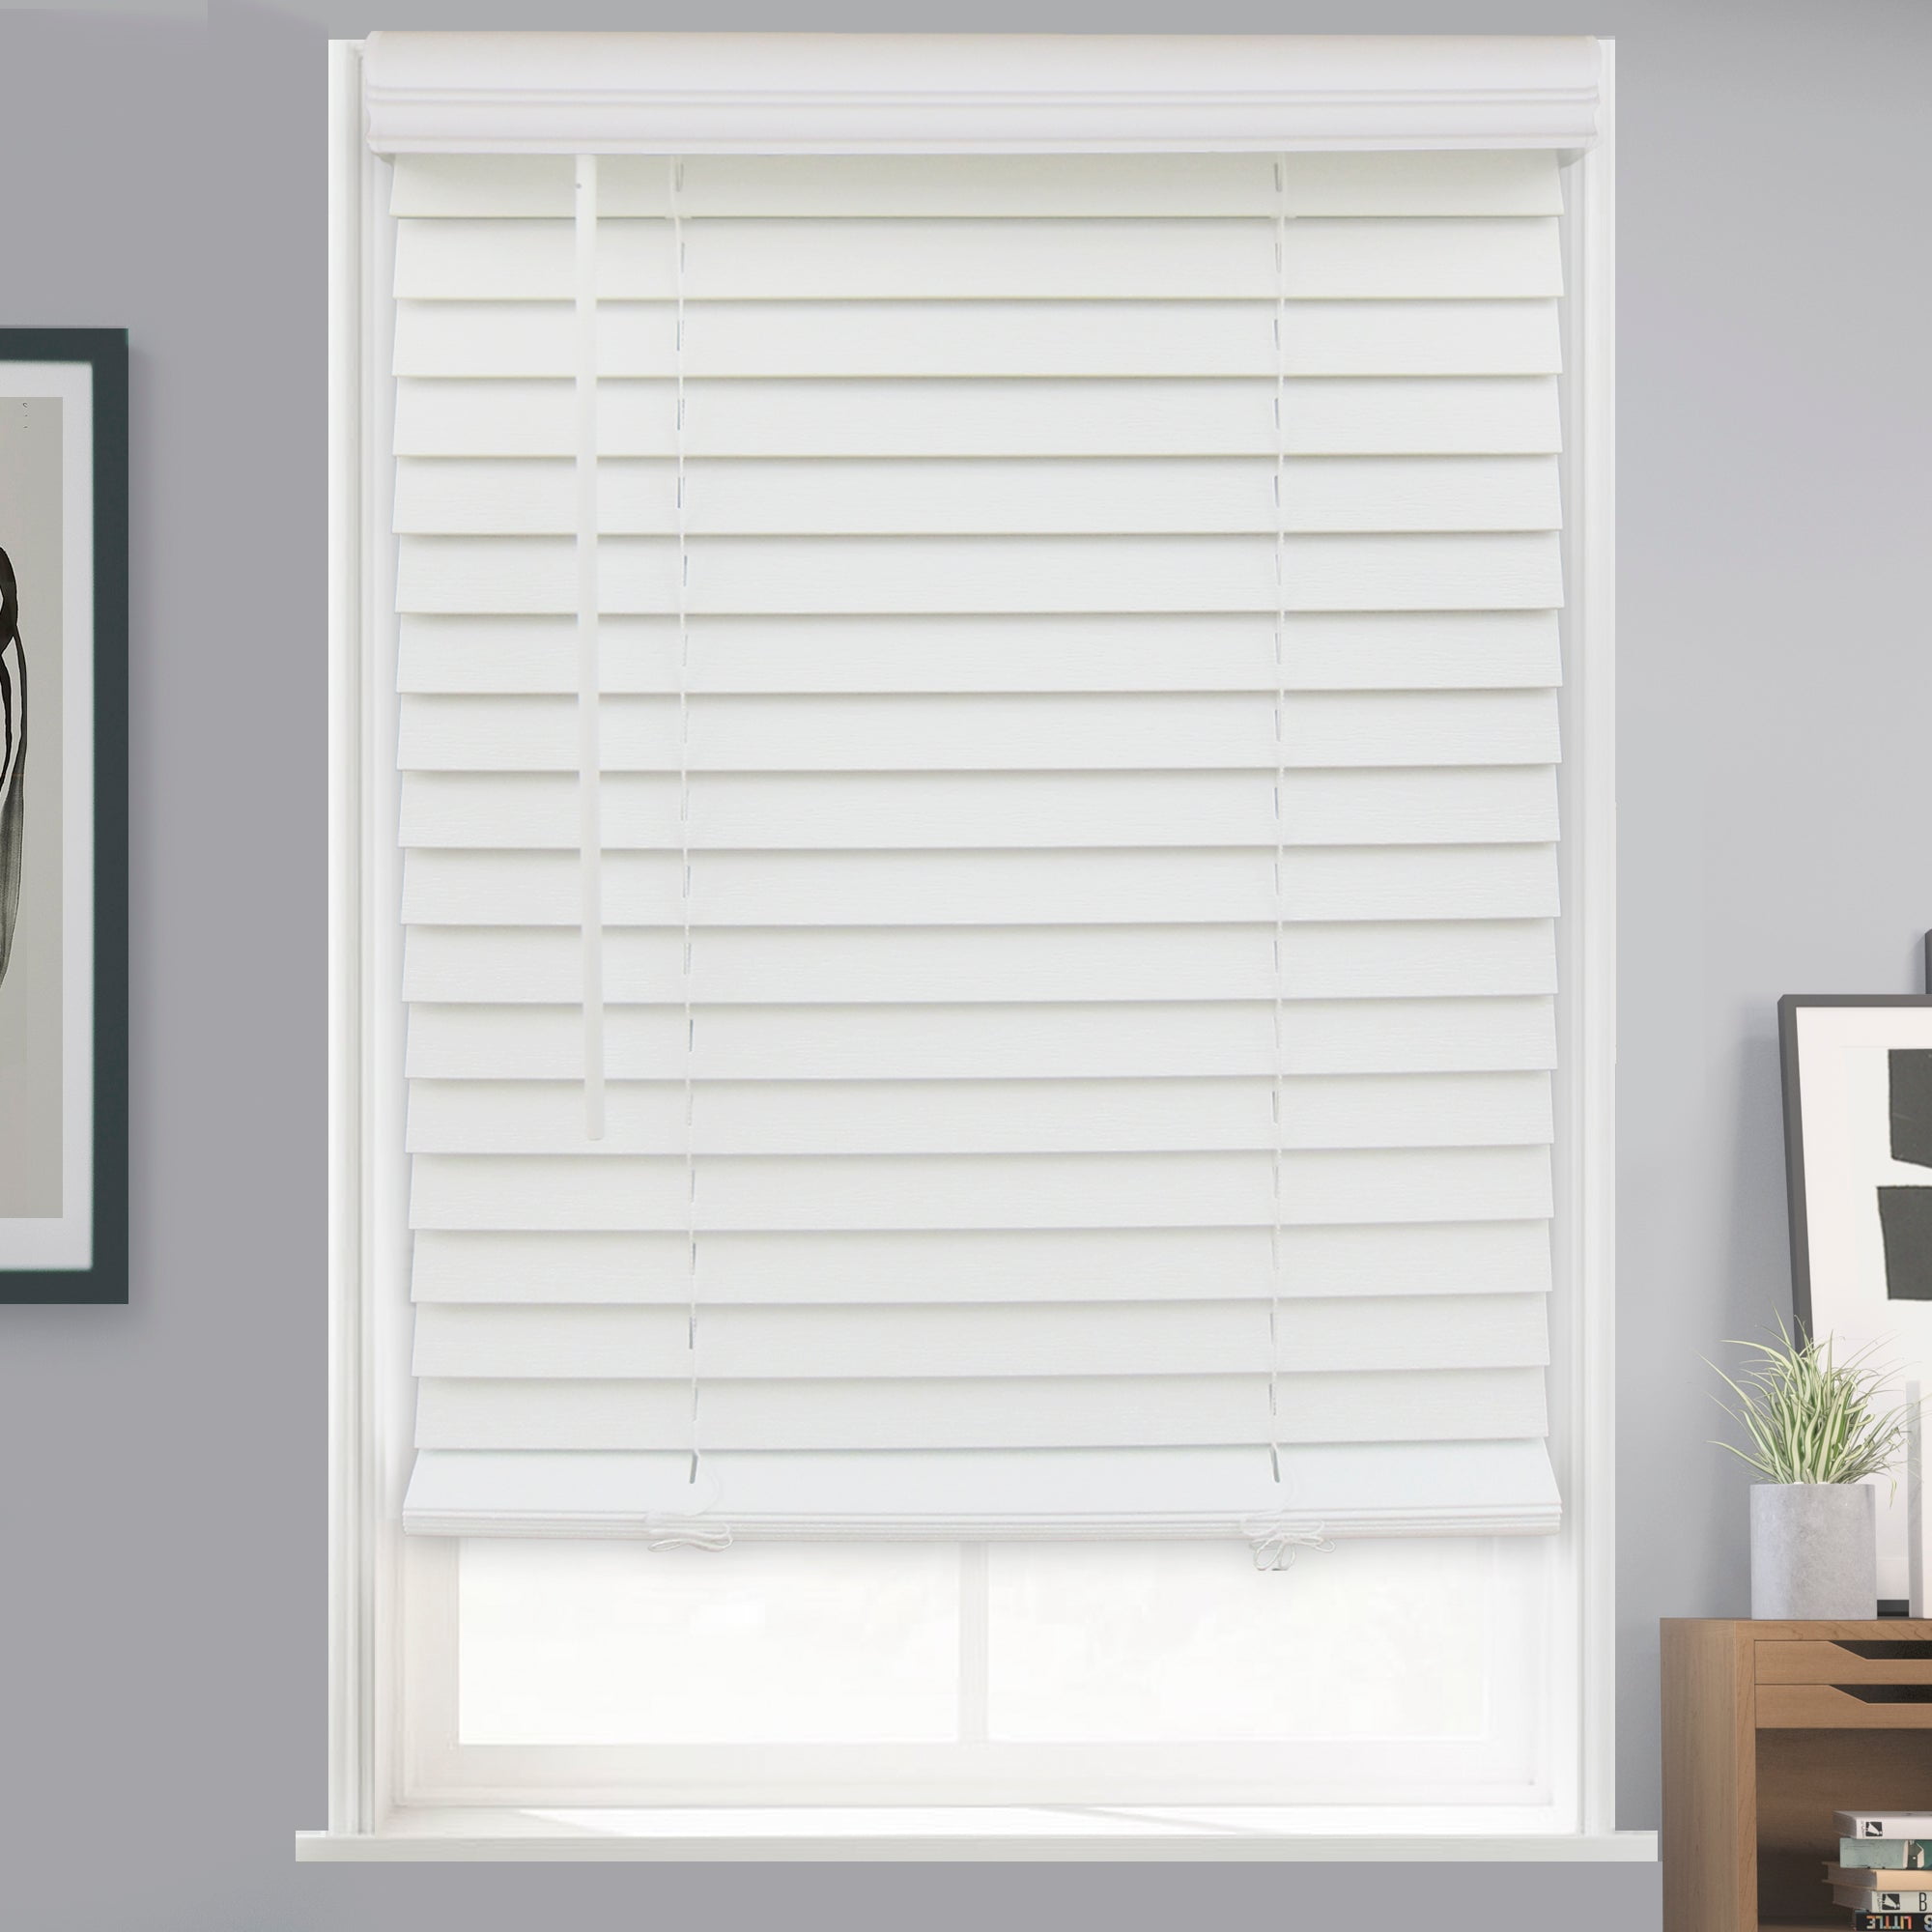 W X 64 In Faux Wood Blind L 44 In Actual Size 43.5 In. White Cordless 2 In 